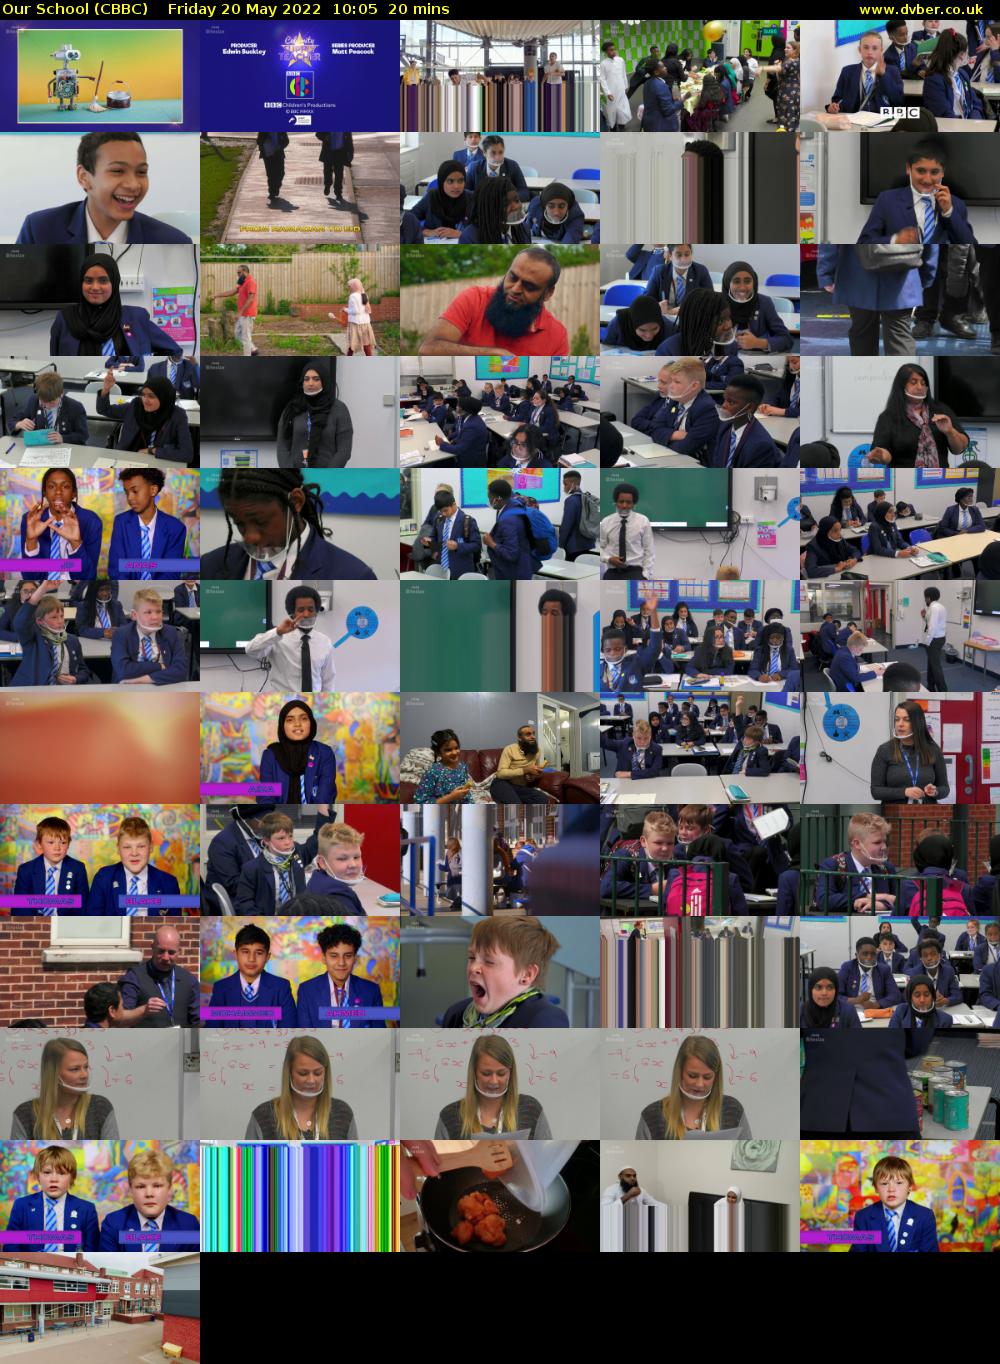 Our School (CBBC) Friday 20 May 2022 10:05 - 10:25